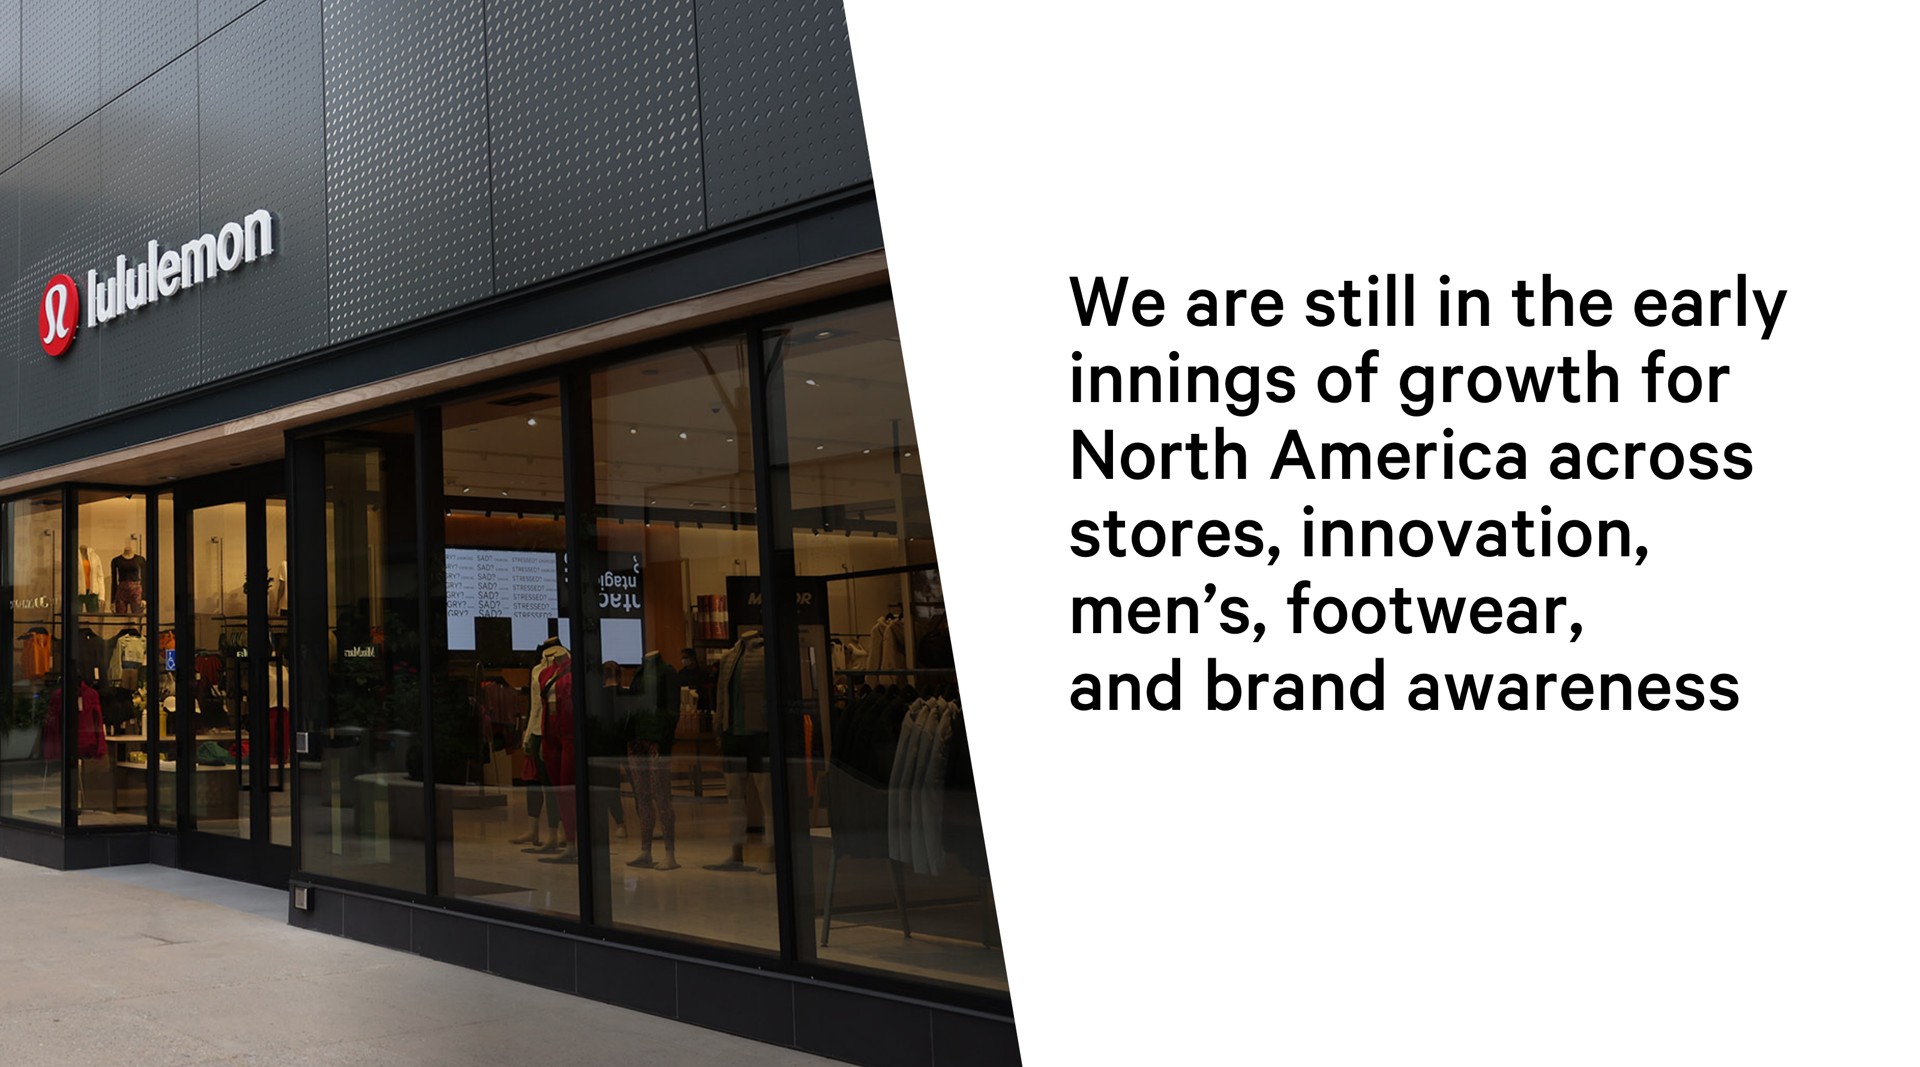 we are still in the early innings of growth for north across stores innovation men footwear and brand awareness | Lululemon